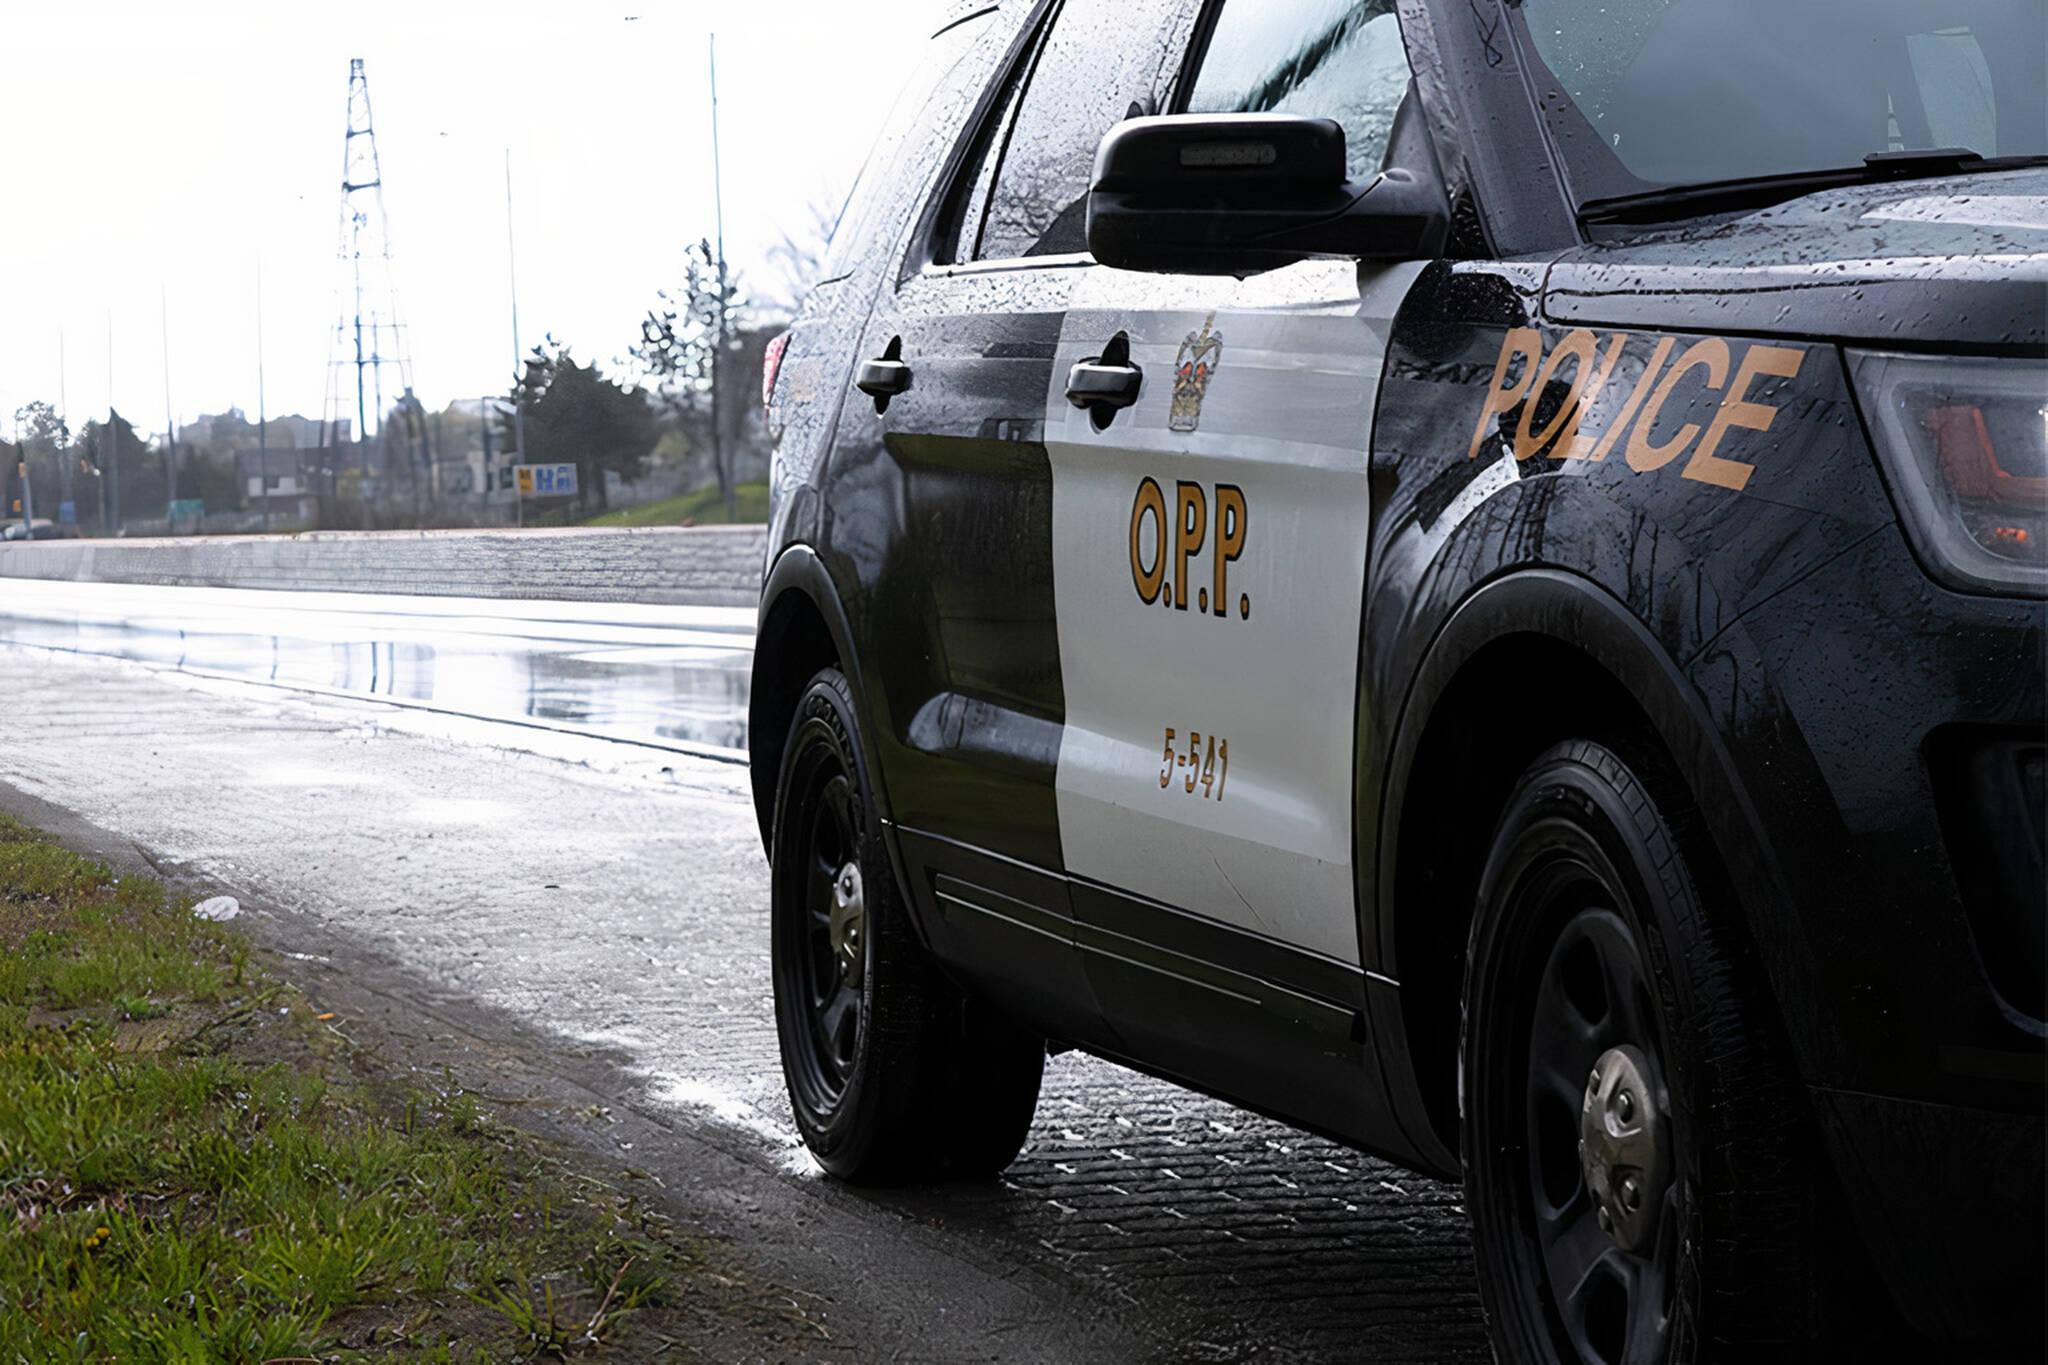 Early Morning Amber Alert Has People In Ontario Complaining Once Again